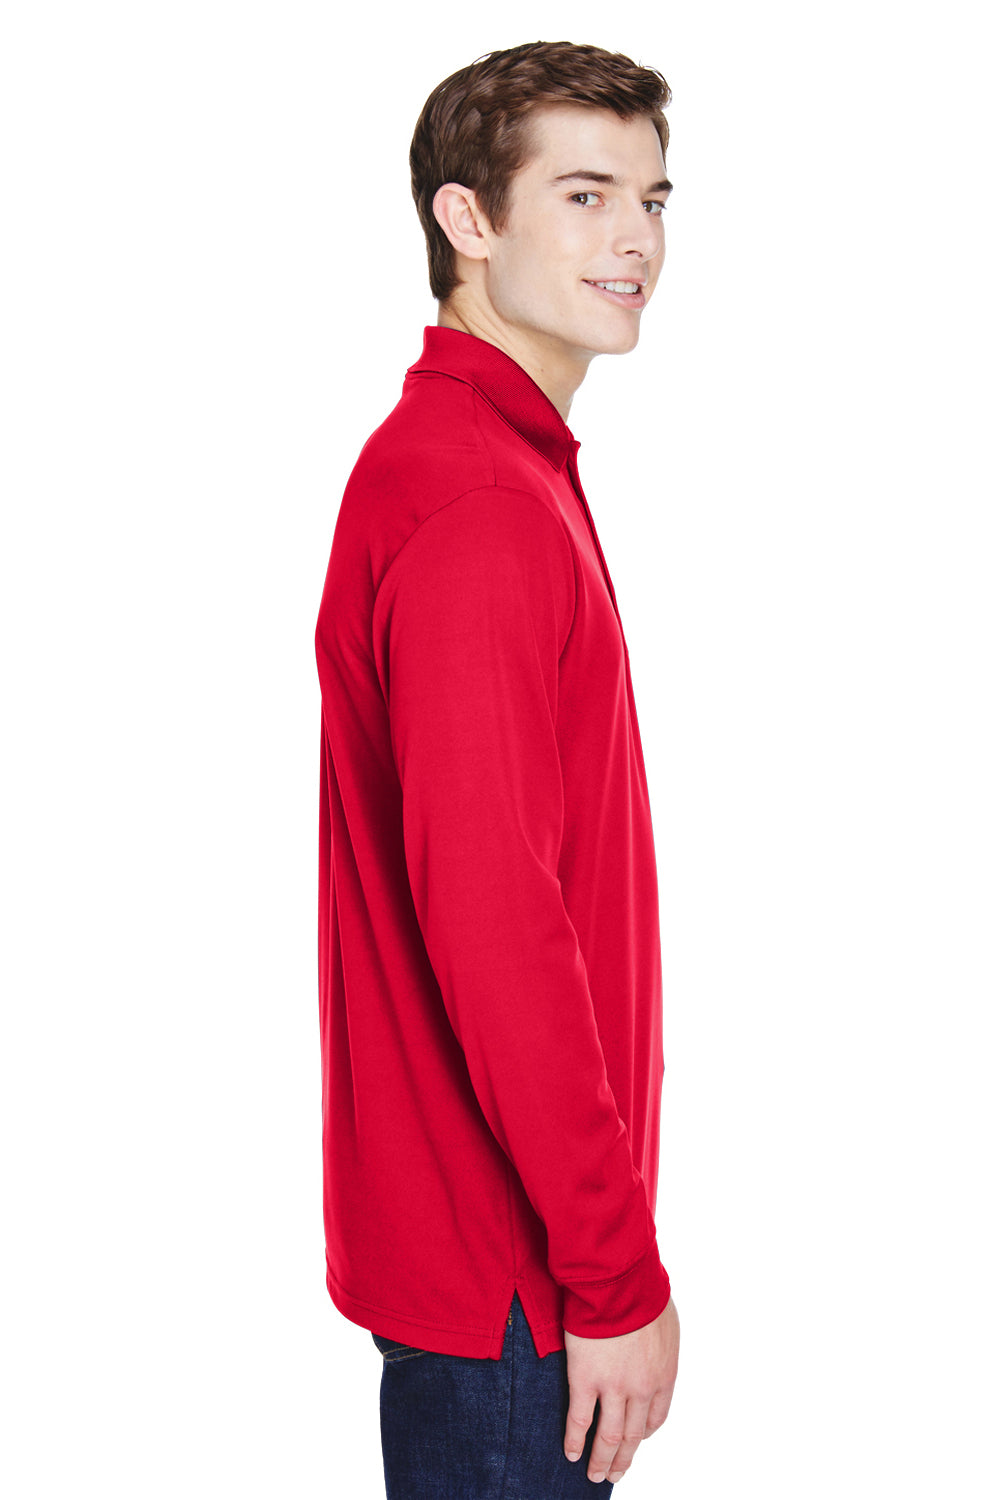 Core 365 88192P Mens Pinnacle Performance Moisture Wicking Long Sleeve Polo Shirt w/ Pocket Red Side